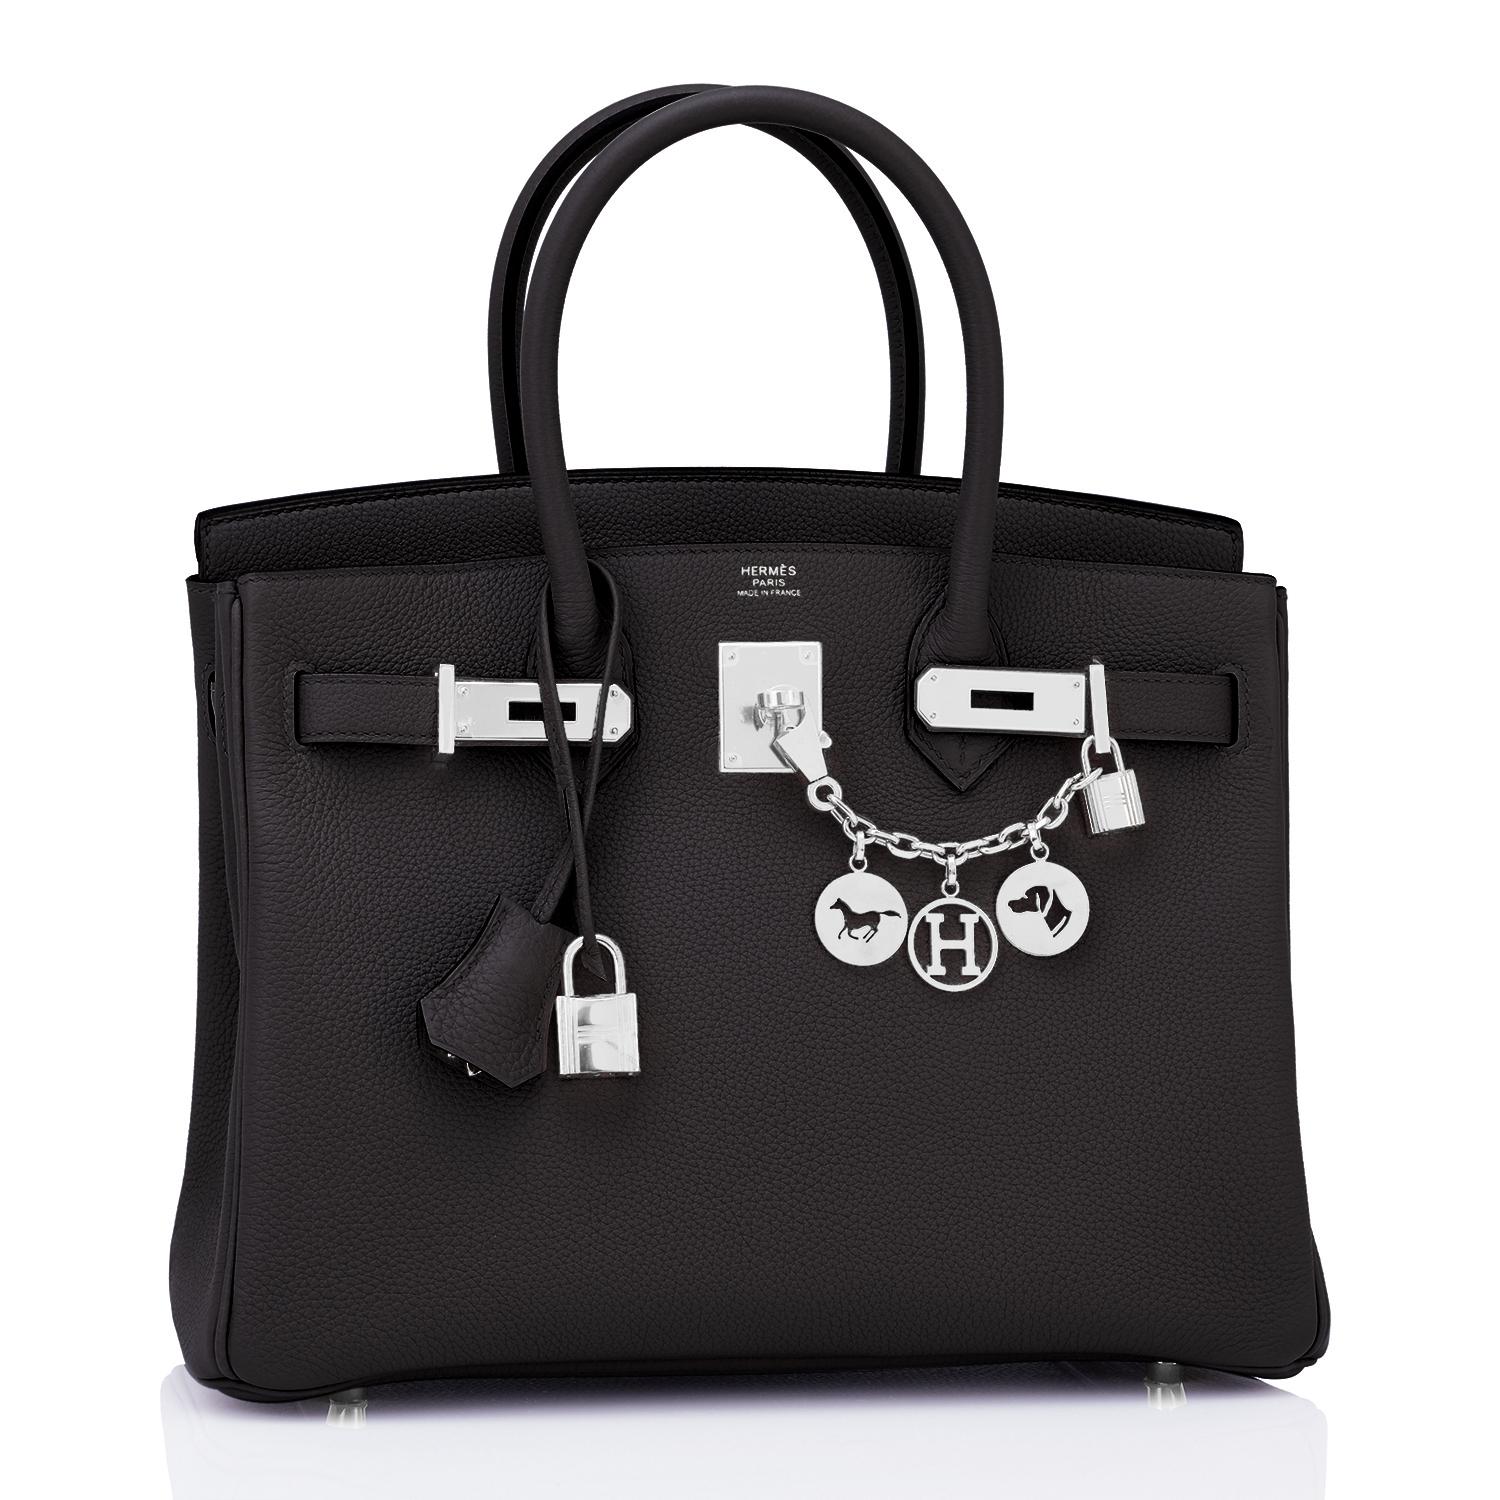 Hermes Birkin 30cm Black Togo Palladium Hardware Bag Y Stamp, 2020
Brand New in Box. Store Fresh. Pristine Condition (with plastic on hardware)
Just purchased from Hermes store; bag bears new 2020 interior Y stamp! 
Perfect gift! Comes with keys,